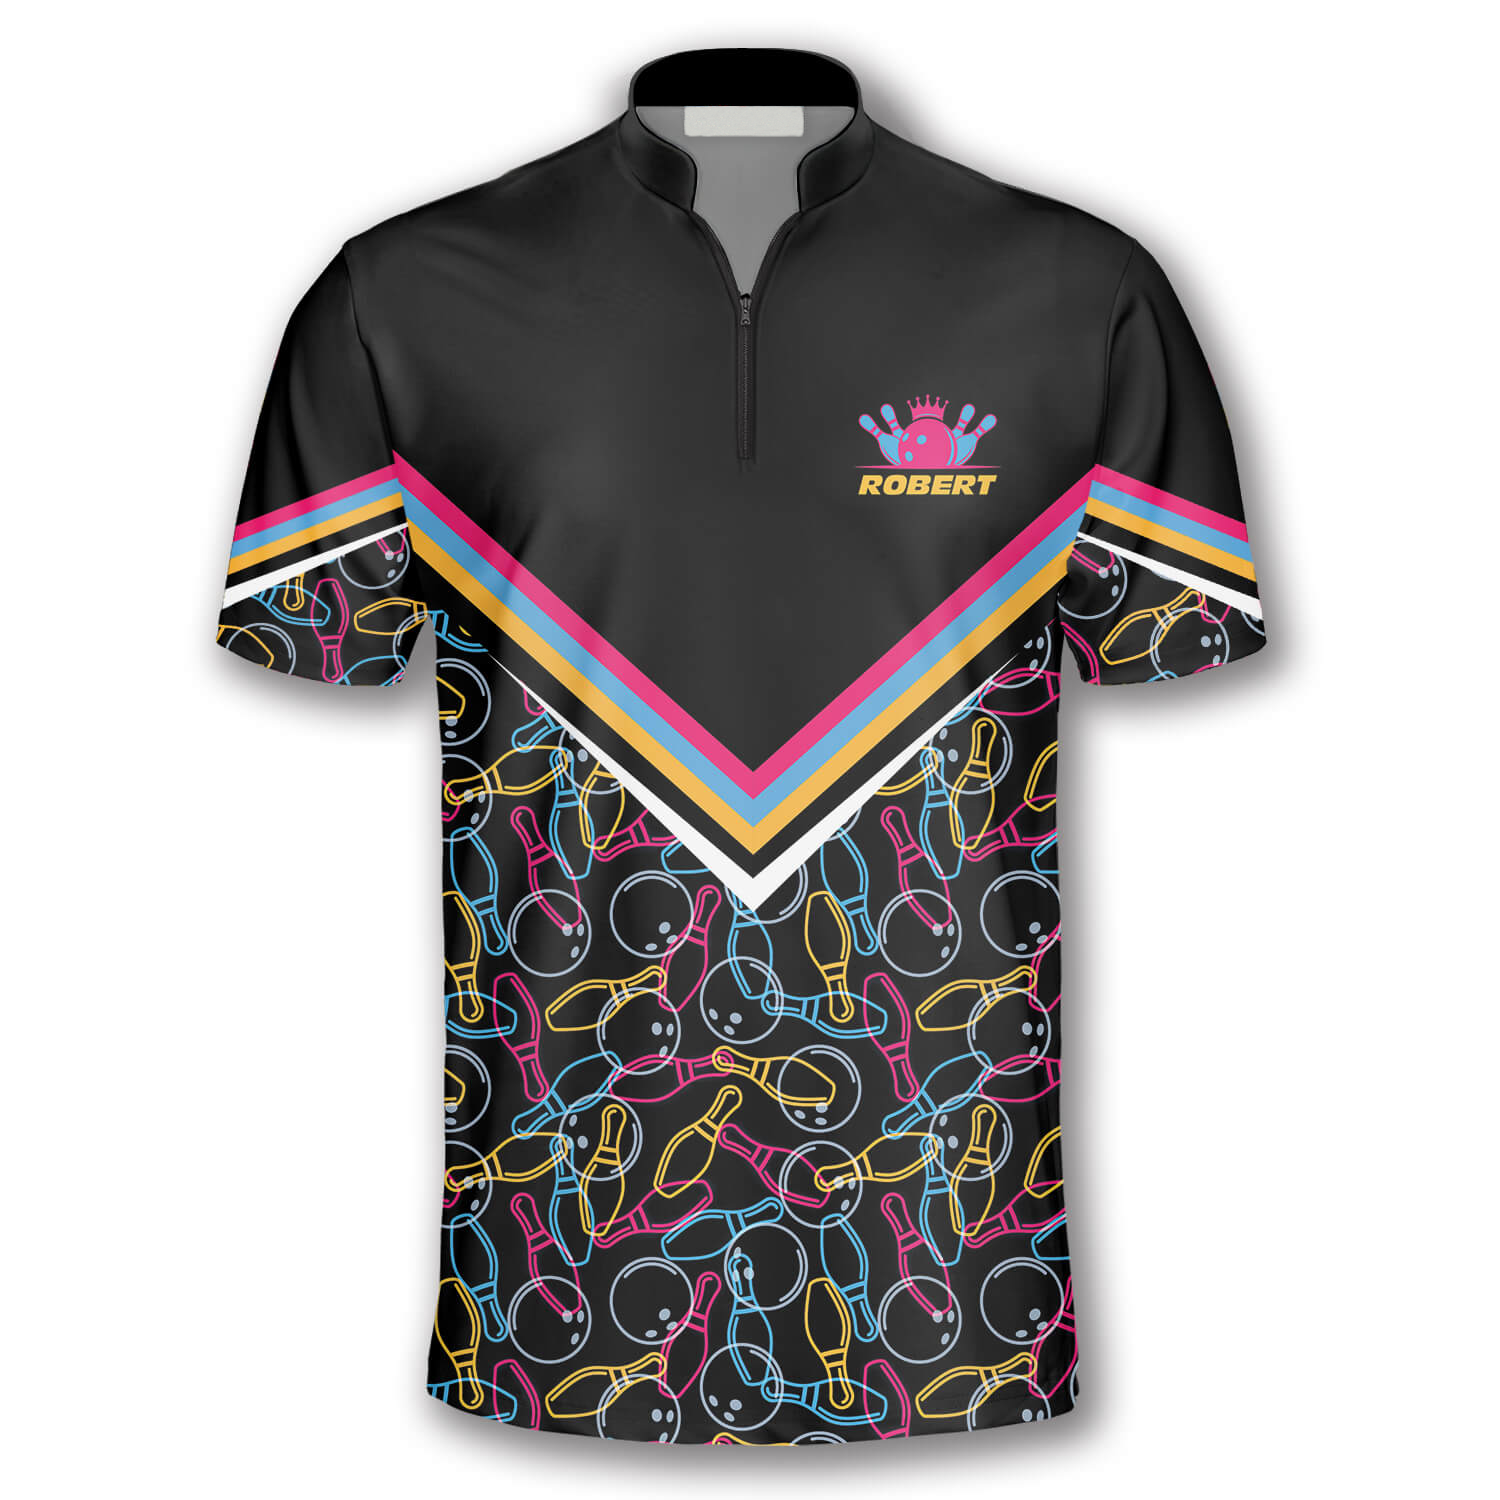 3D All Over Print Bowling Pattern In Black Colorful Lines Custom Bowling Jerseys for Men